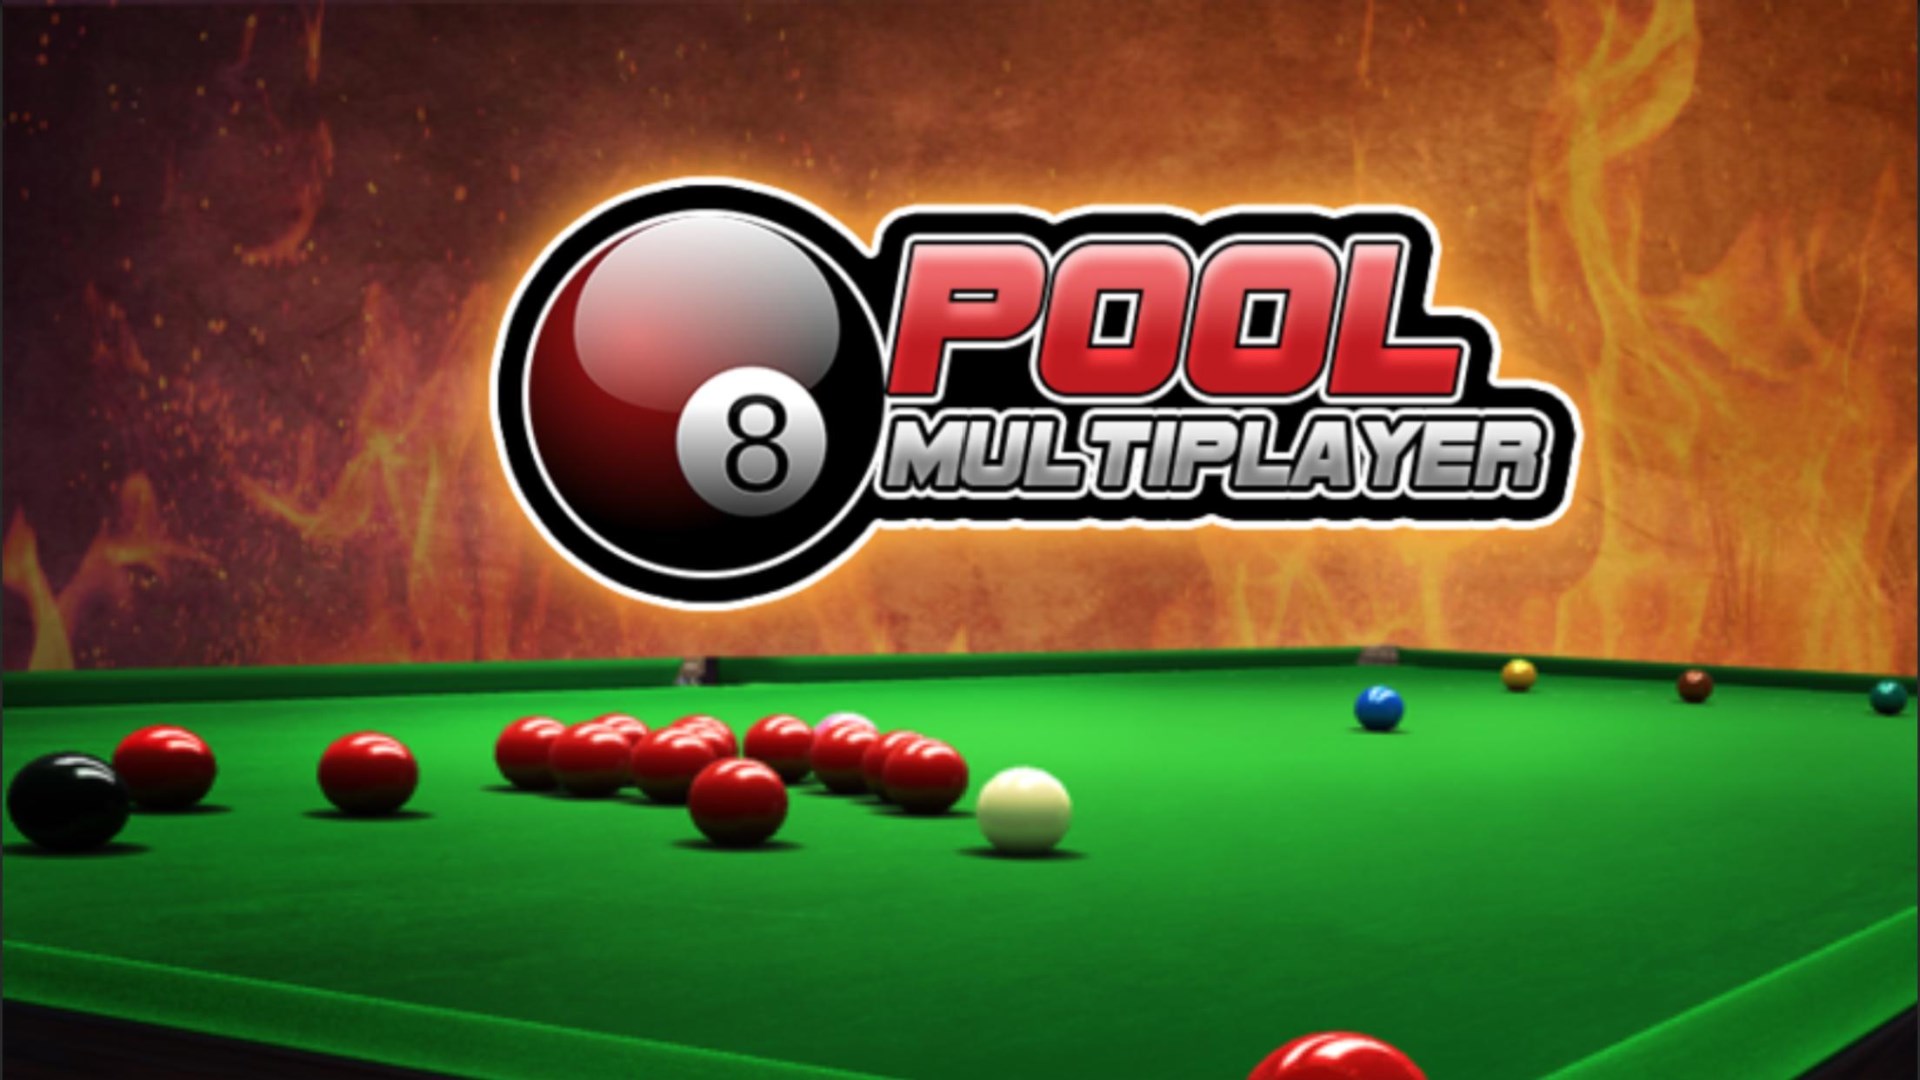 8 ball pool game free download for window 7